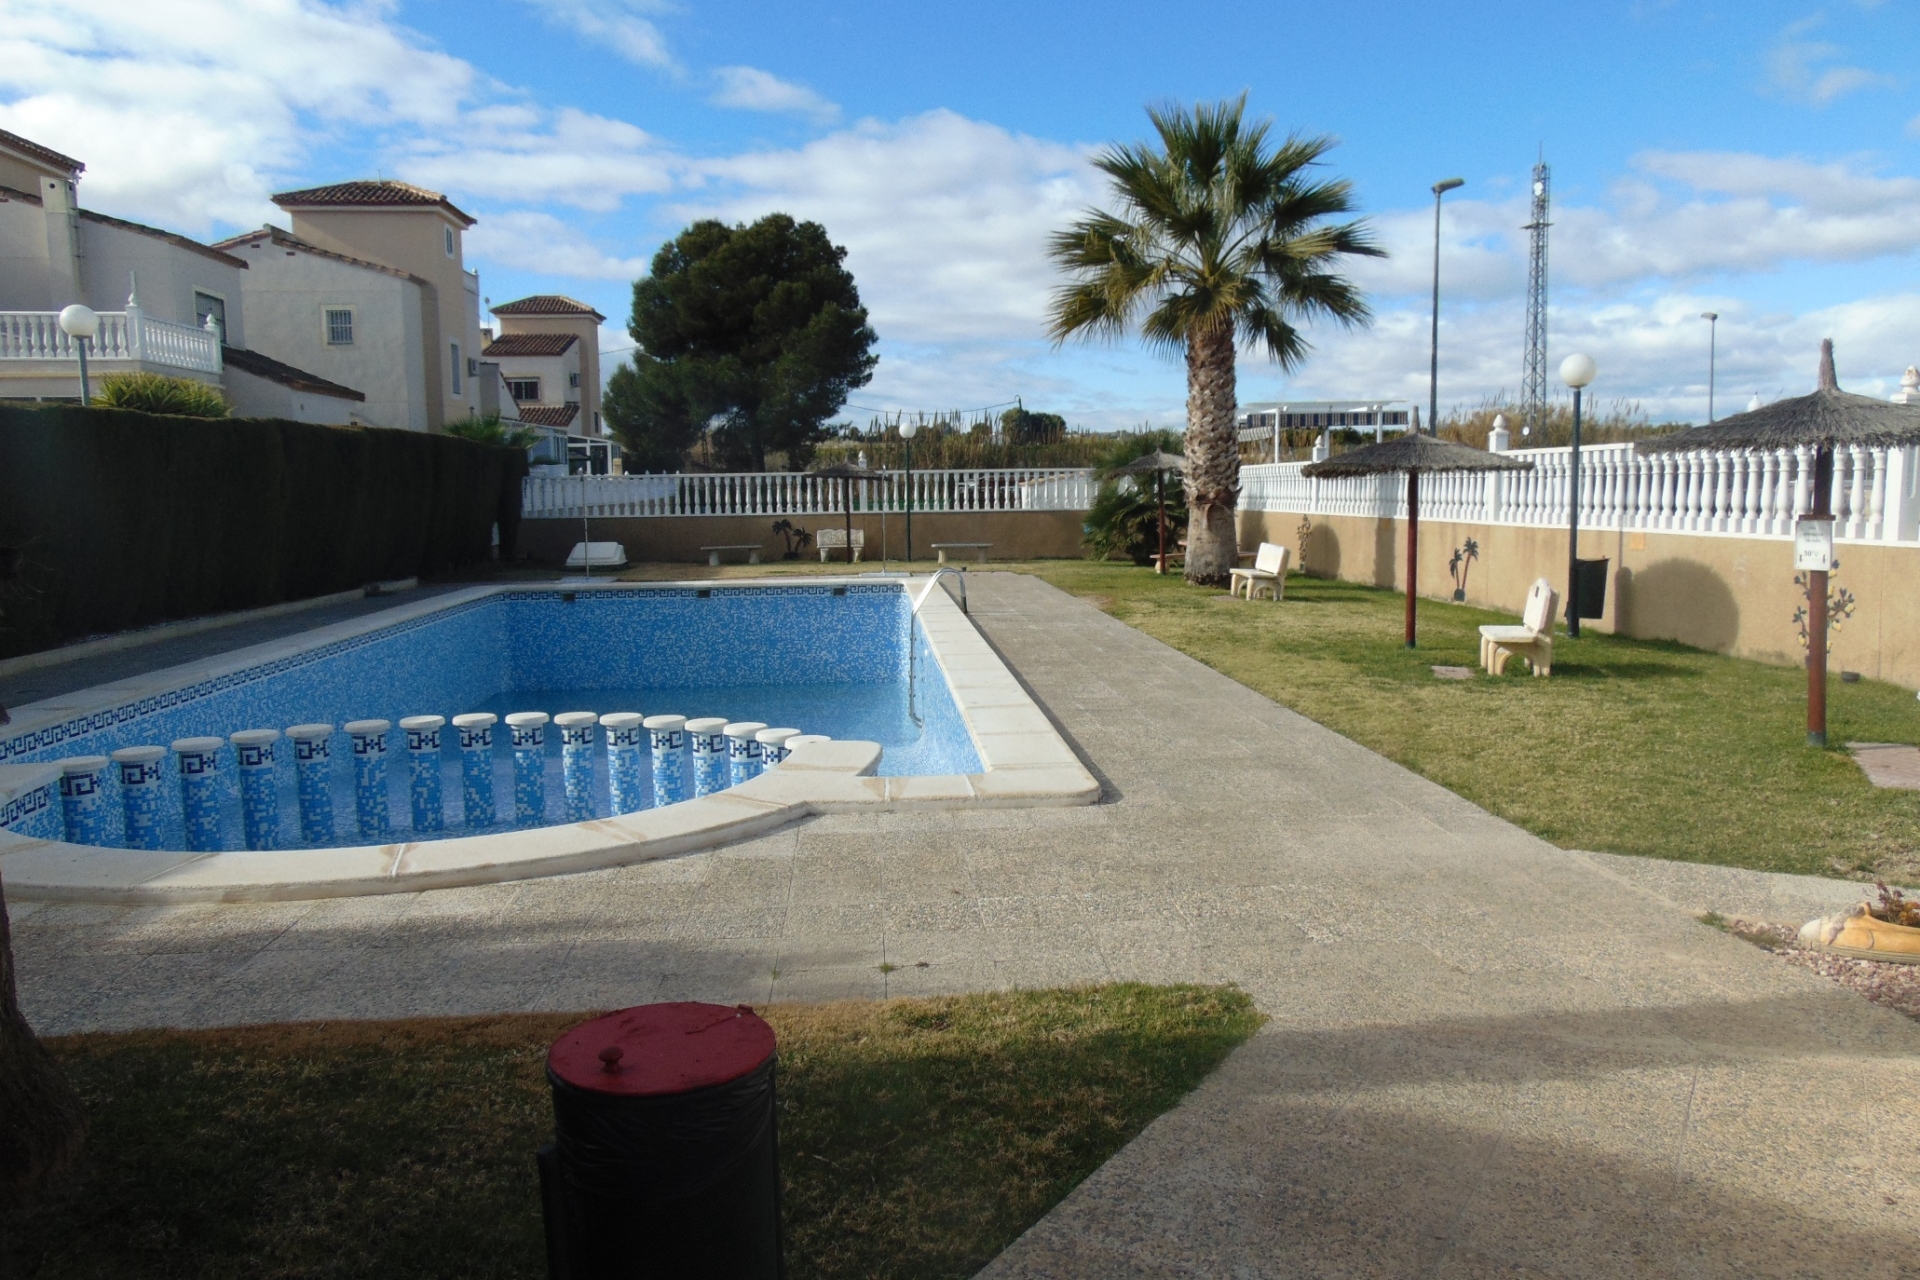 Property on Hold - Townhouse for sale - Algorfa - Montebello